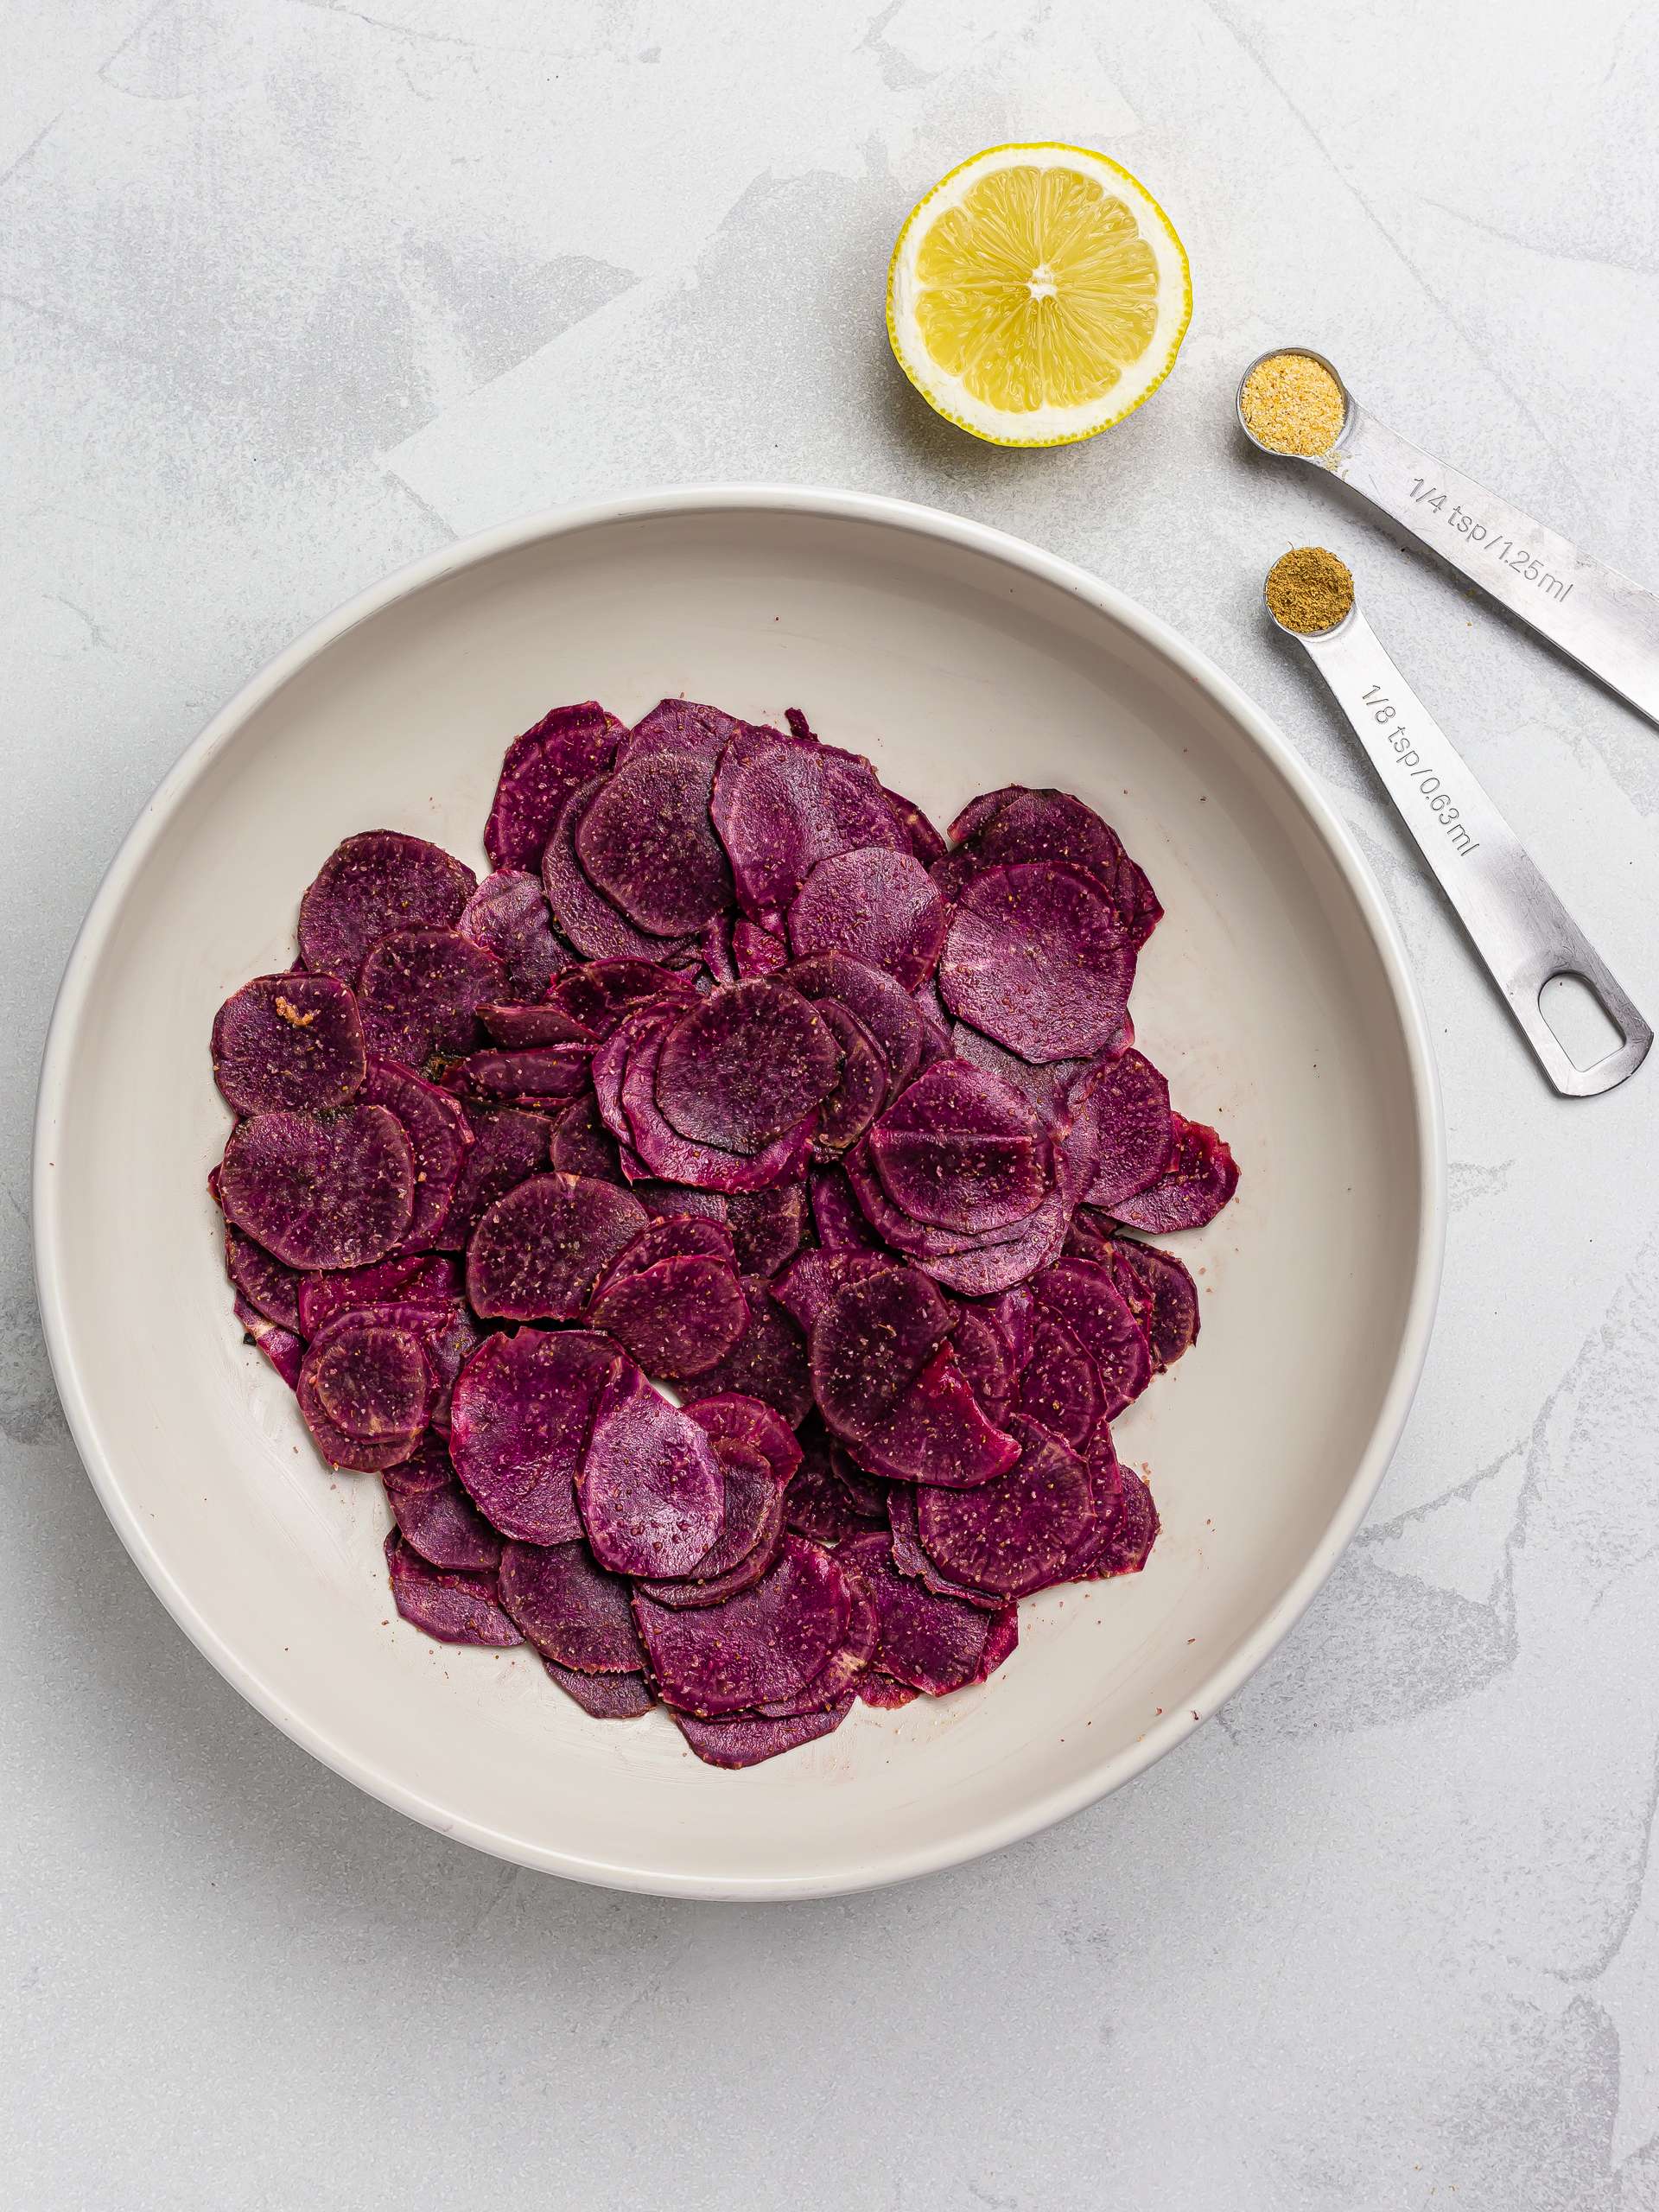 purple sweet potatoes chips seasoned with oil and spices